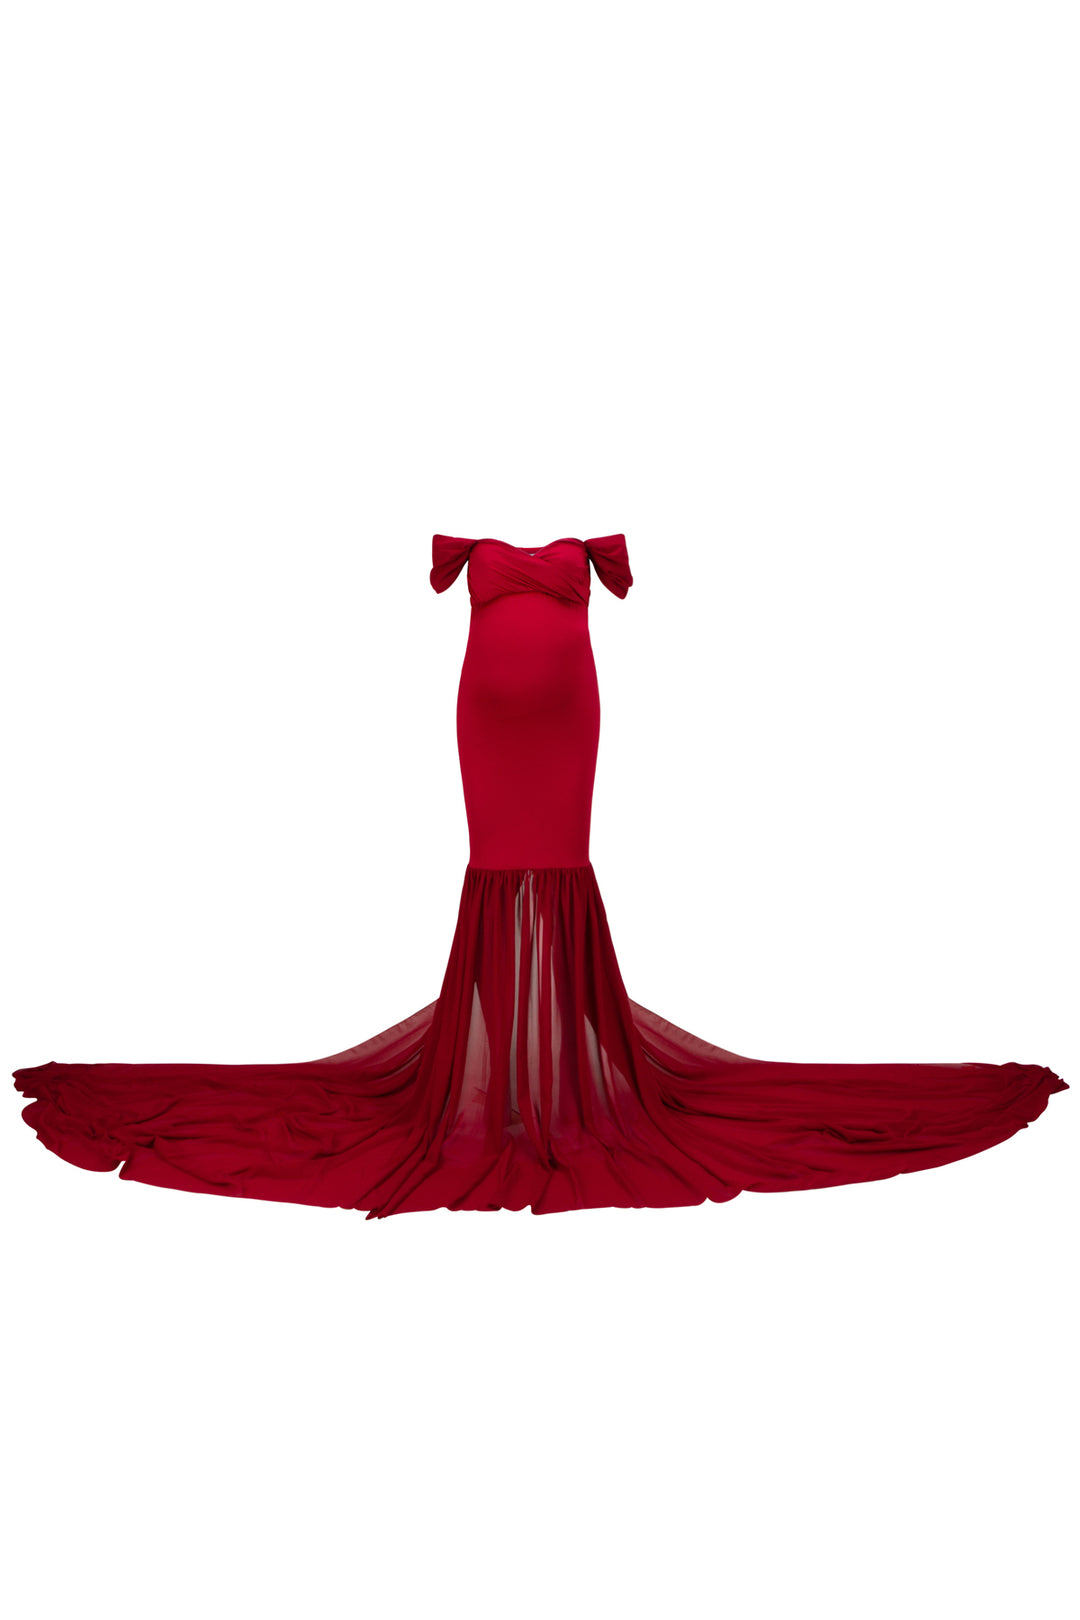 Garnet Monroe Maternity Gown with tossing train One-Size